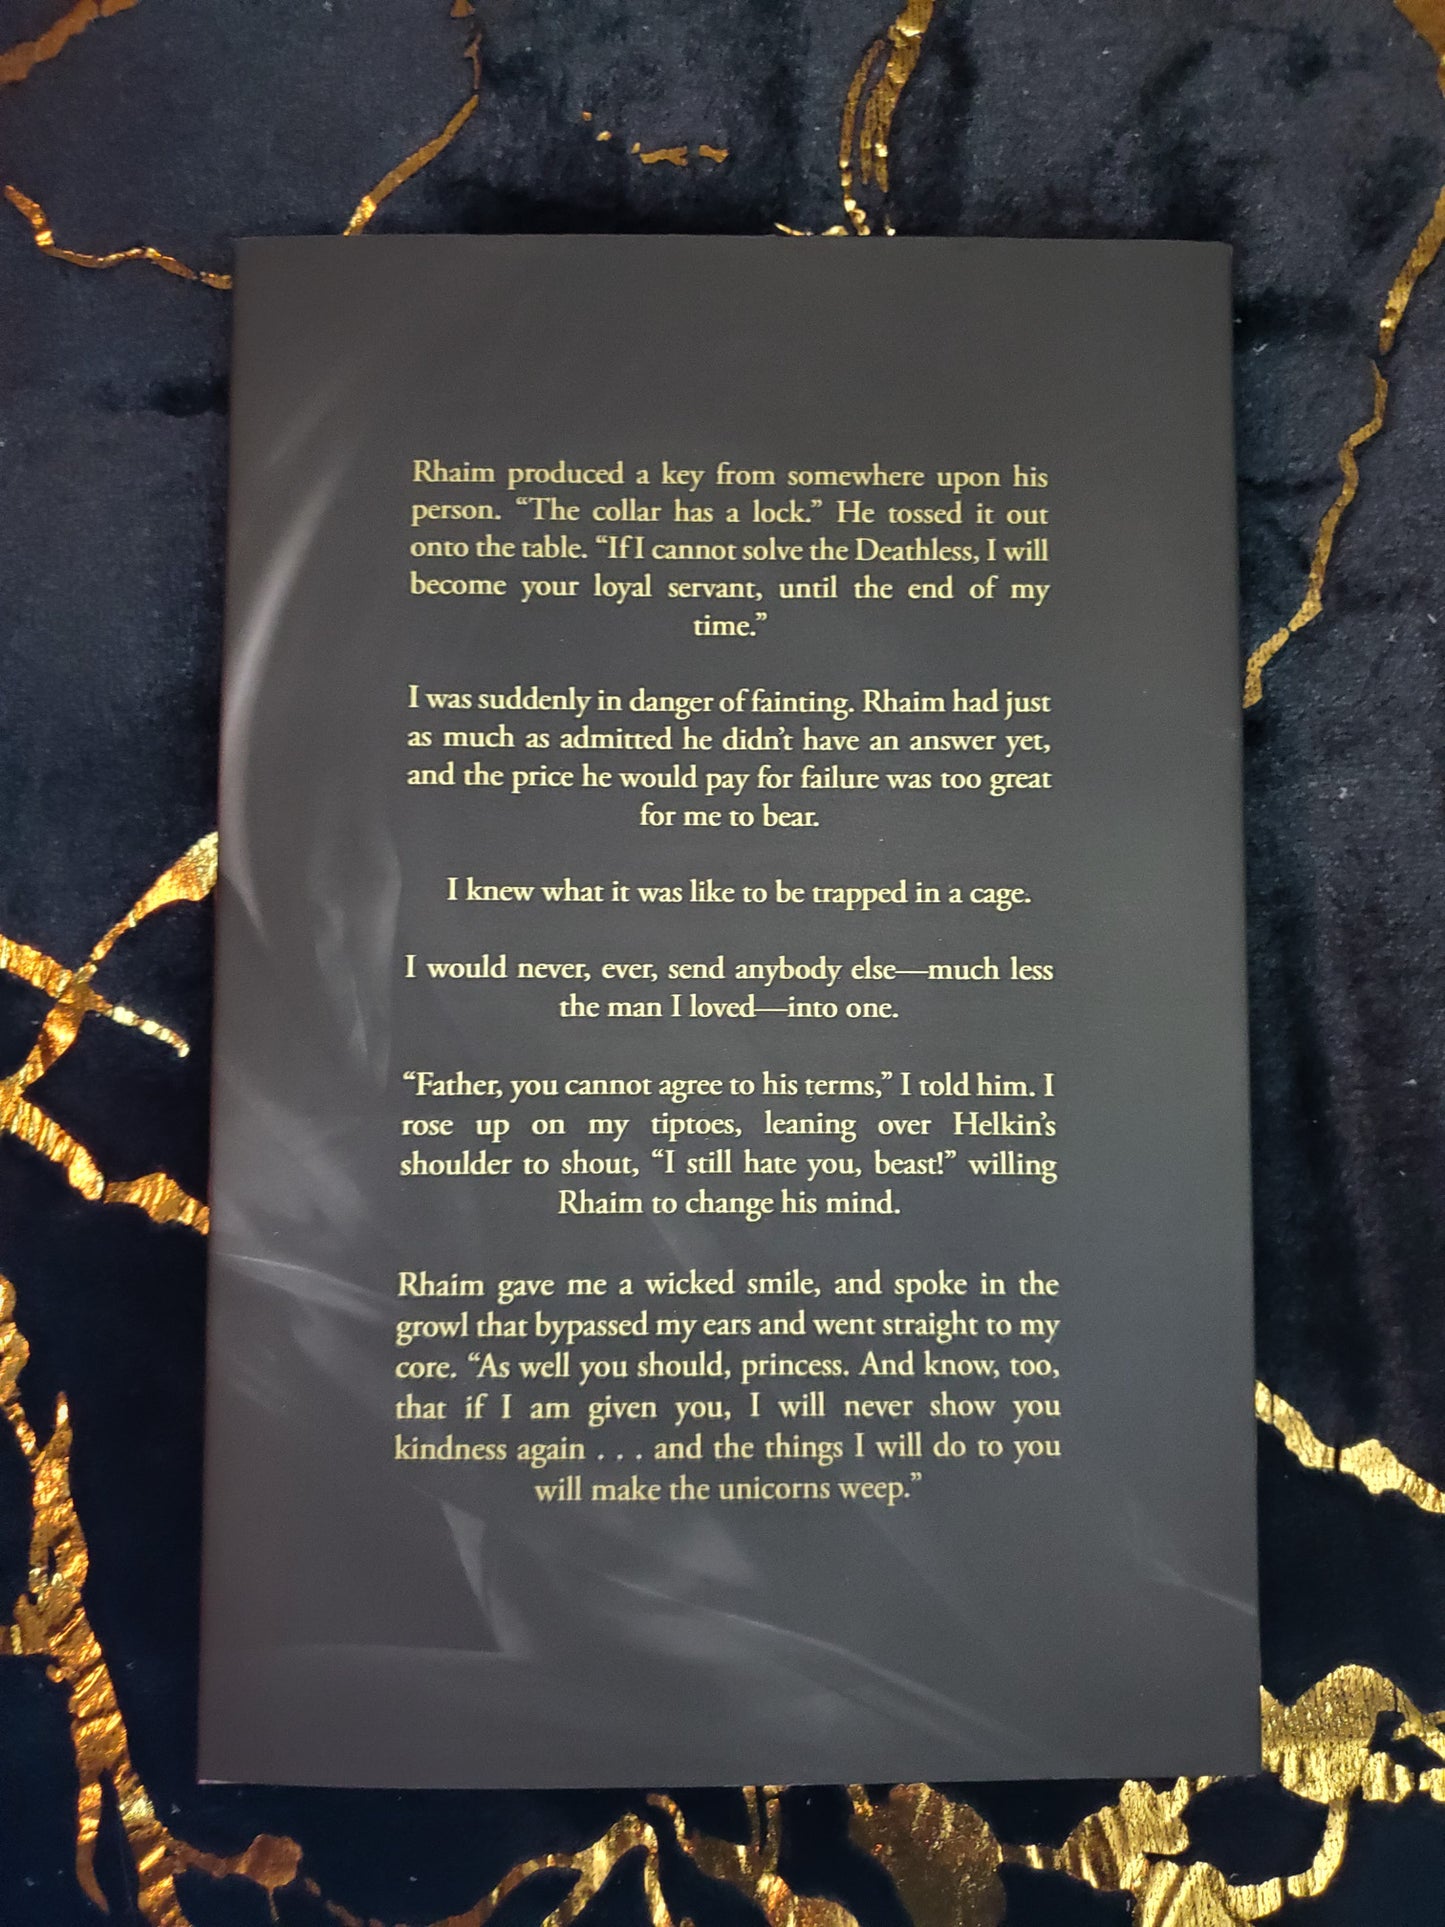 Hardcover of Make Her by Cassie Alexander on a black and gold background. Shows the back cover.